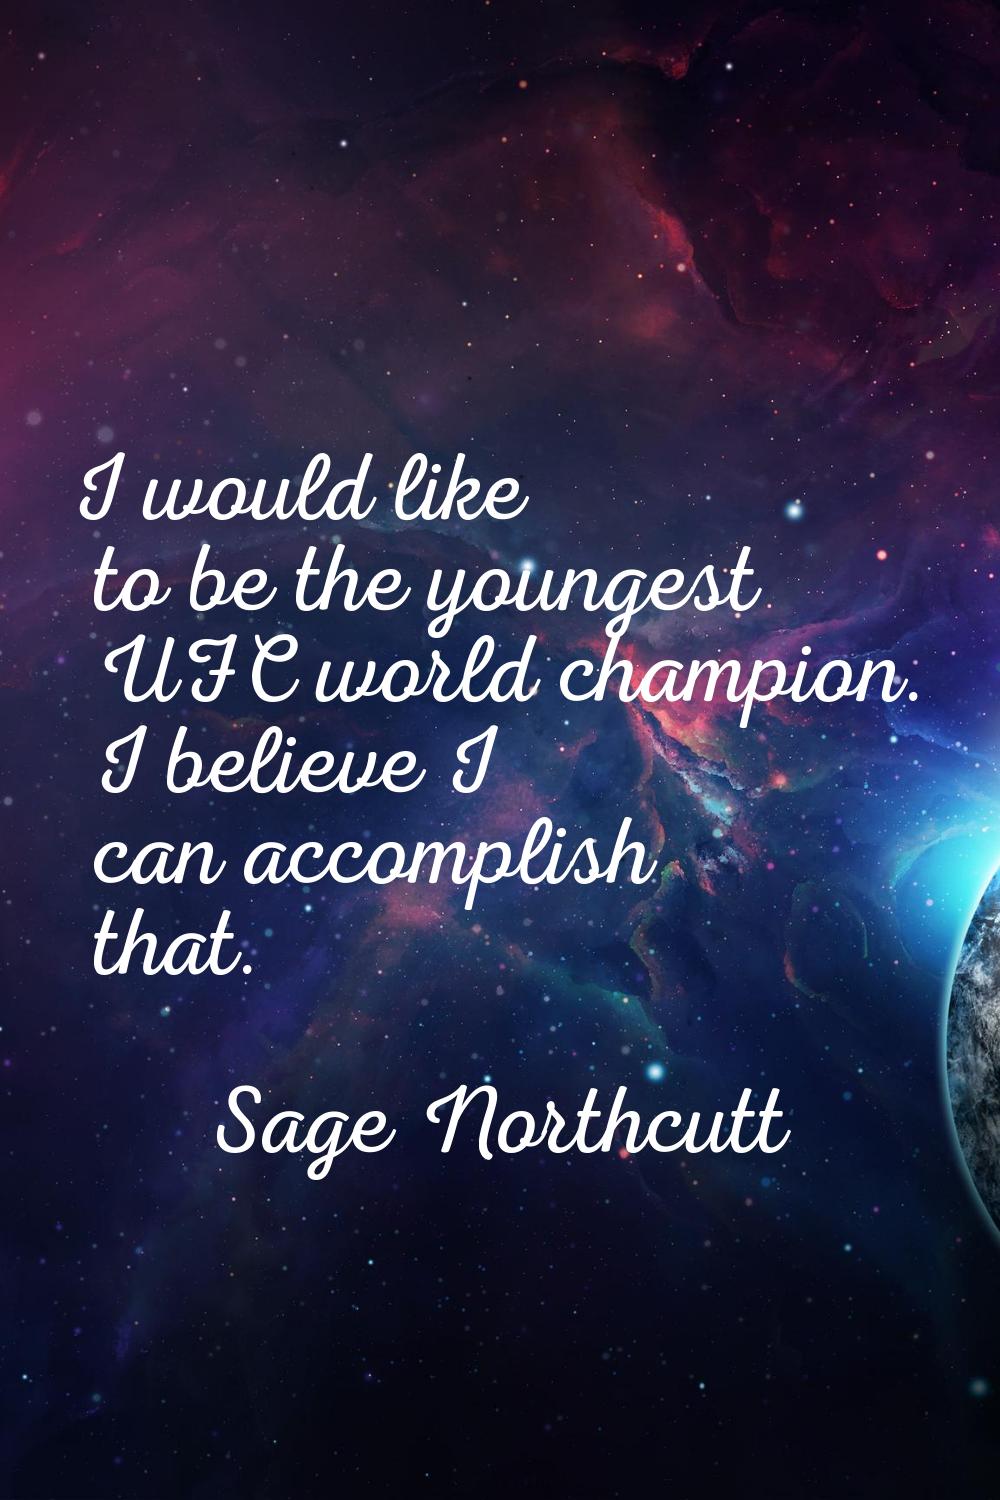 I would like to be the youngest UFC world champion. I believe I can accomplish that.